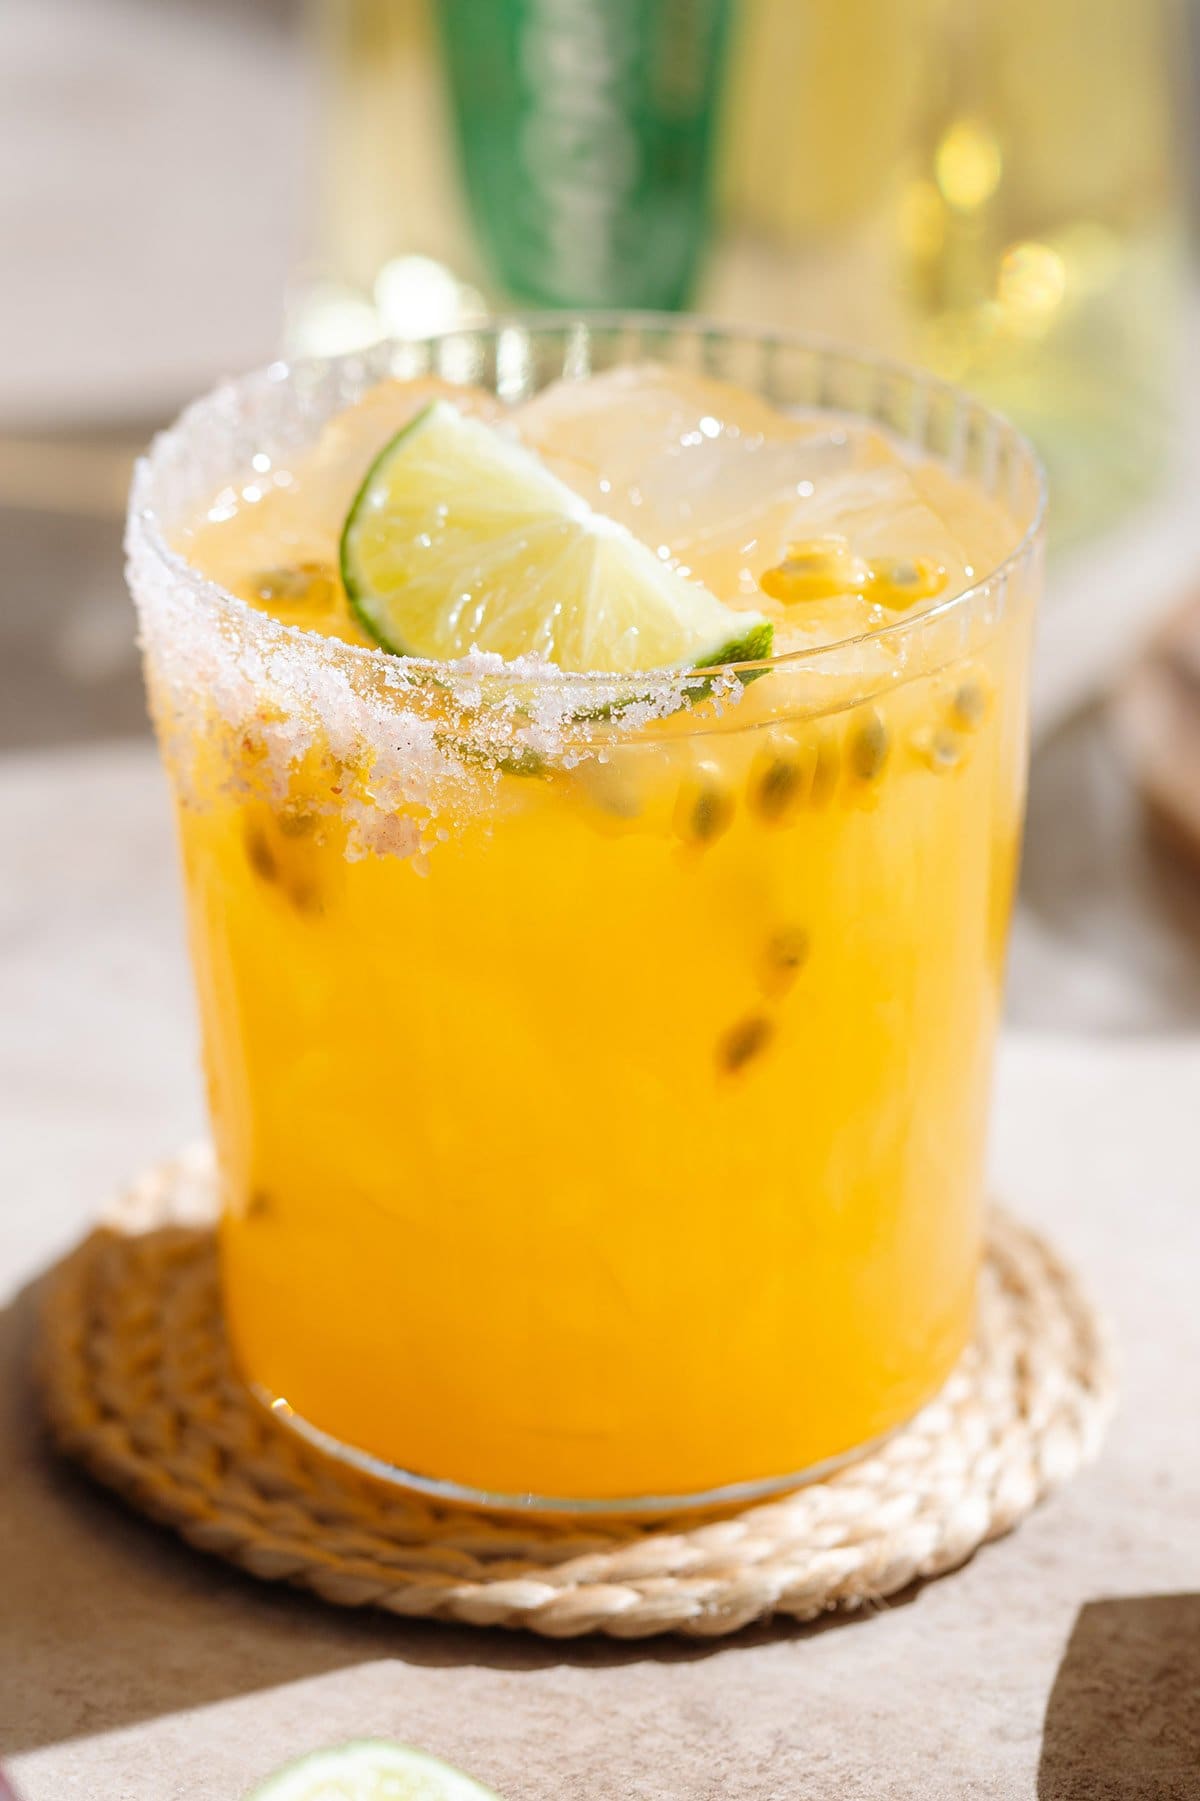 Bright yellow passion fruit margarita in a short salt-rimmed glass with ice and garnished with a slice of lime.